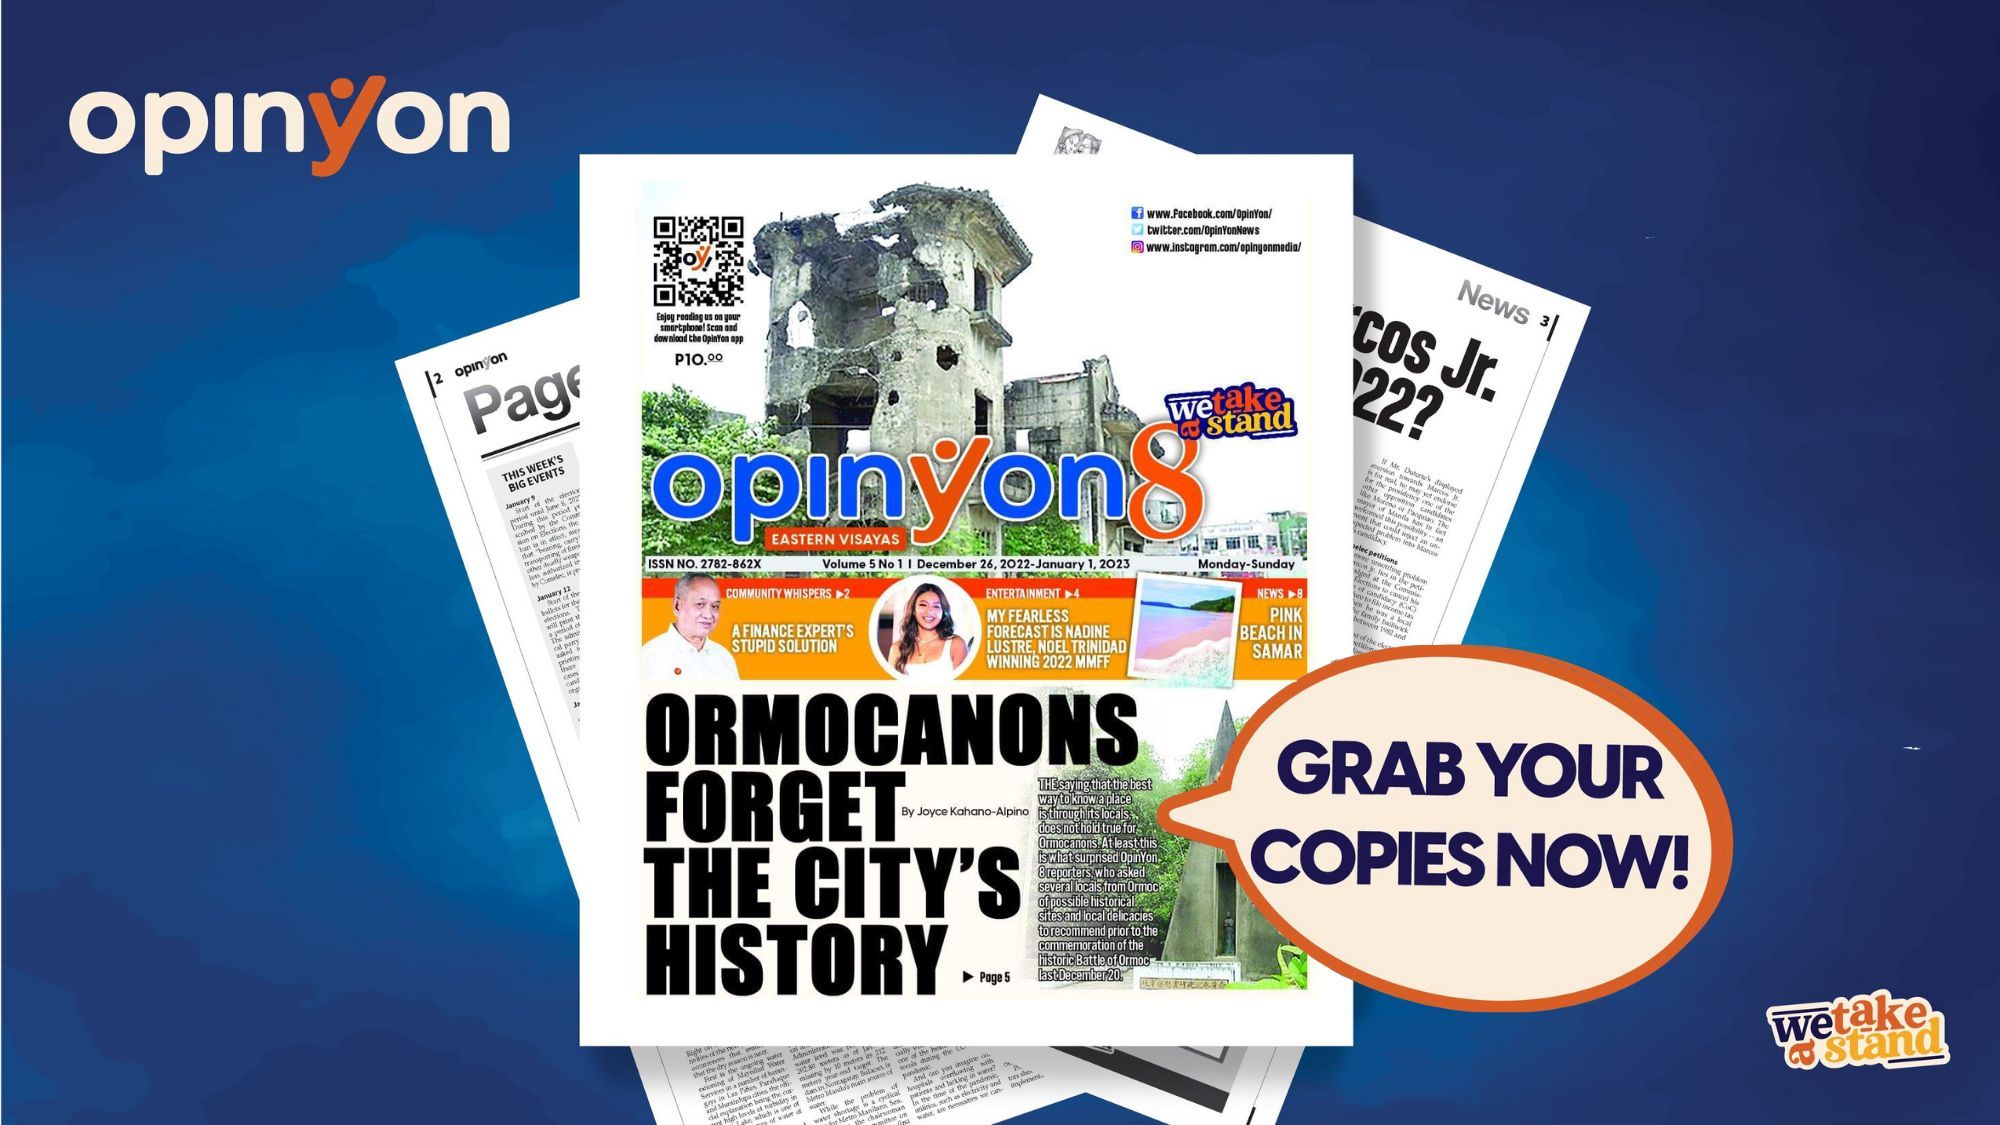 Ormocanons forget the city’s history